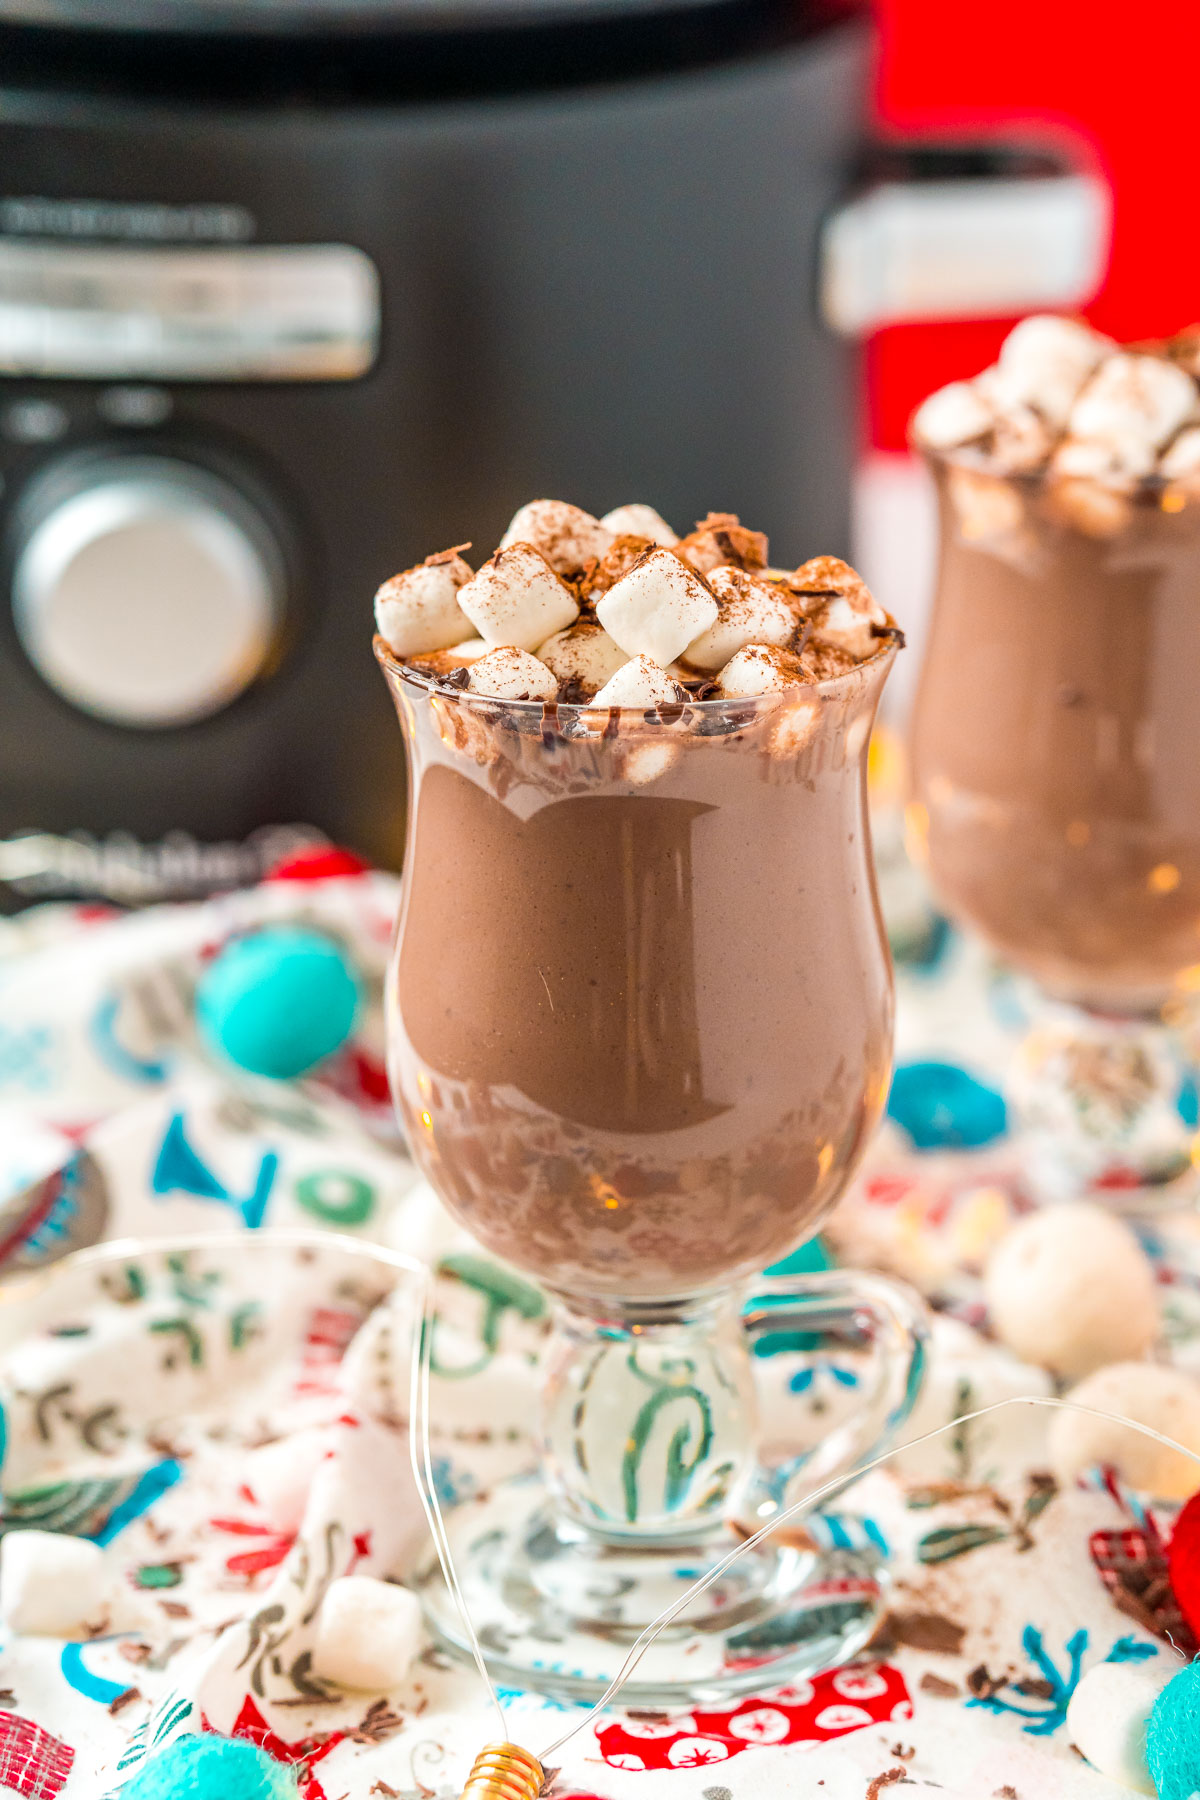 Two mugs of crockpot hot chocolate topped with marshmallows sitting on a festive napkin in front of a crockpot.